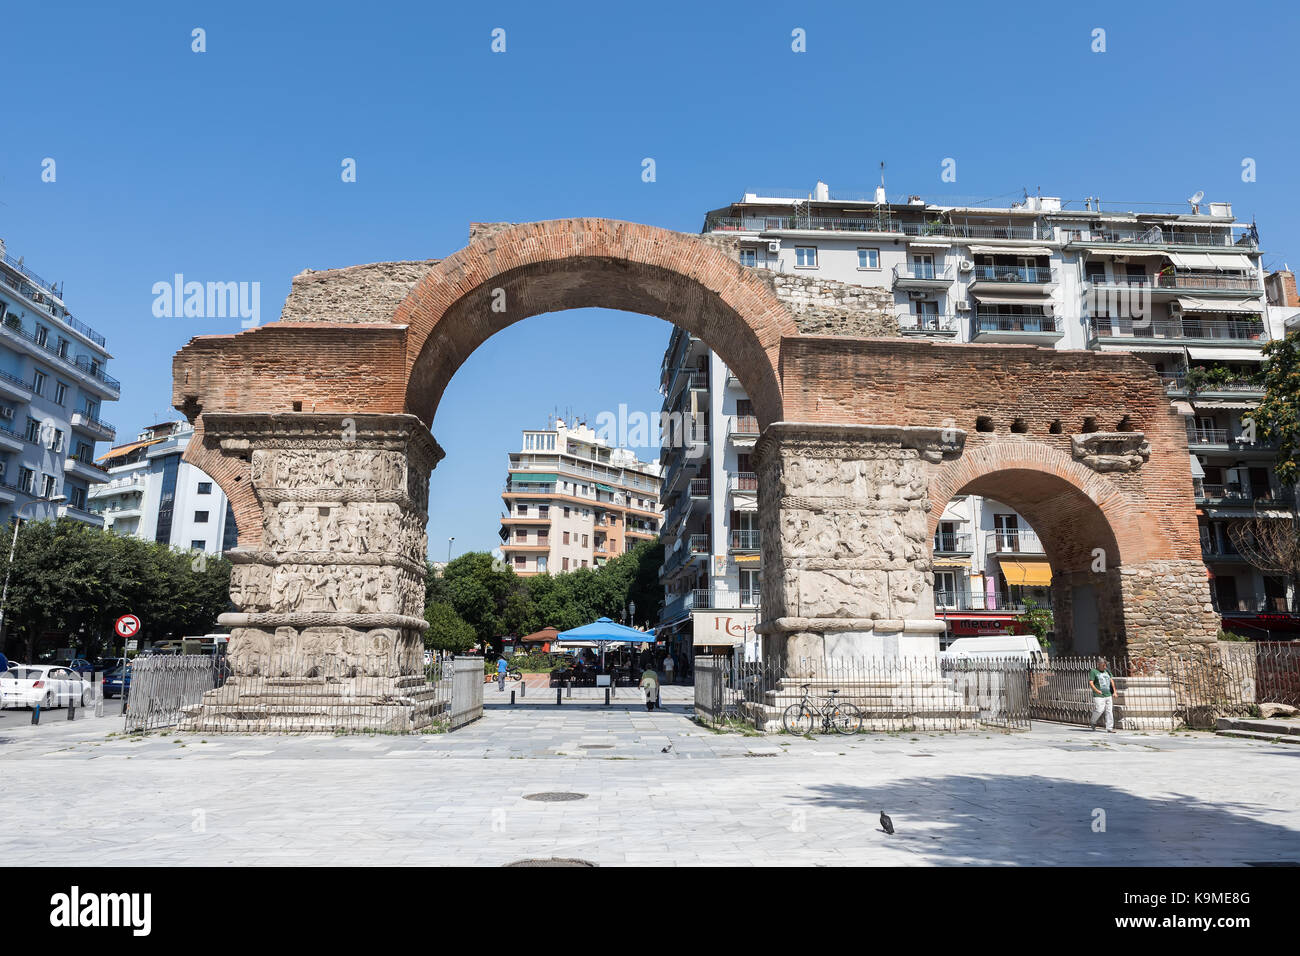 Thessaloniki, Greece - July 20, 2017: The Arch of Galerius (or Kamara) is a 3rd century monument in the city of Thessaloniki, in the region of Central Stock Photo